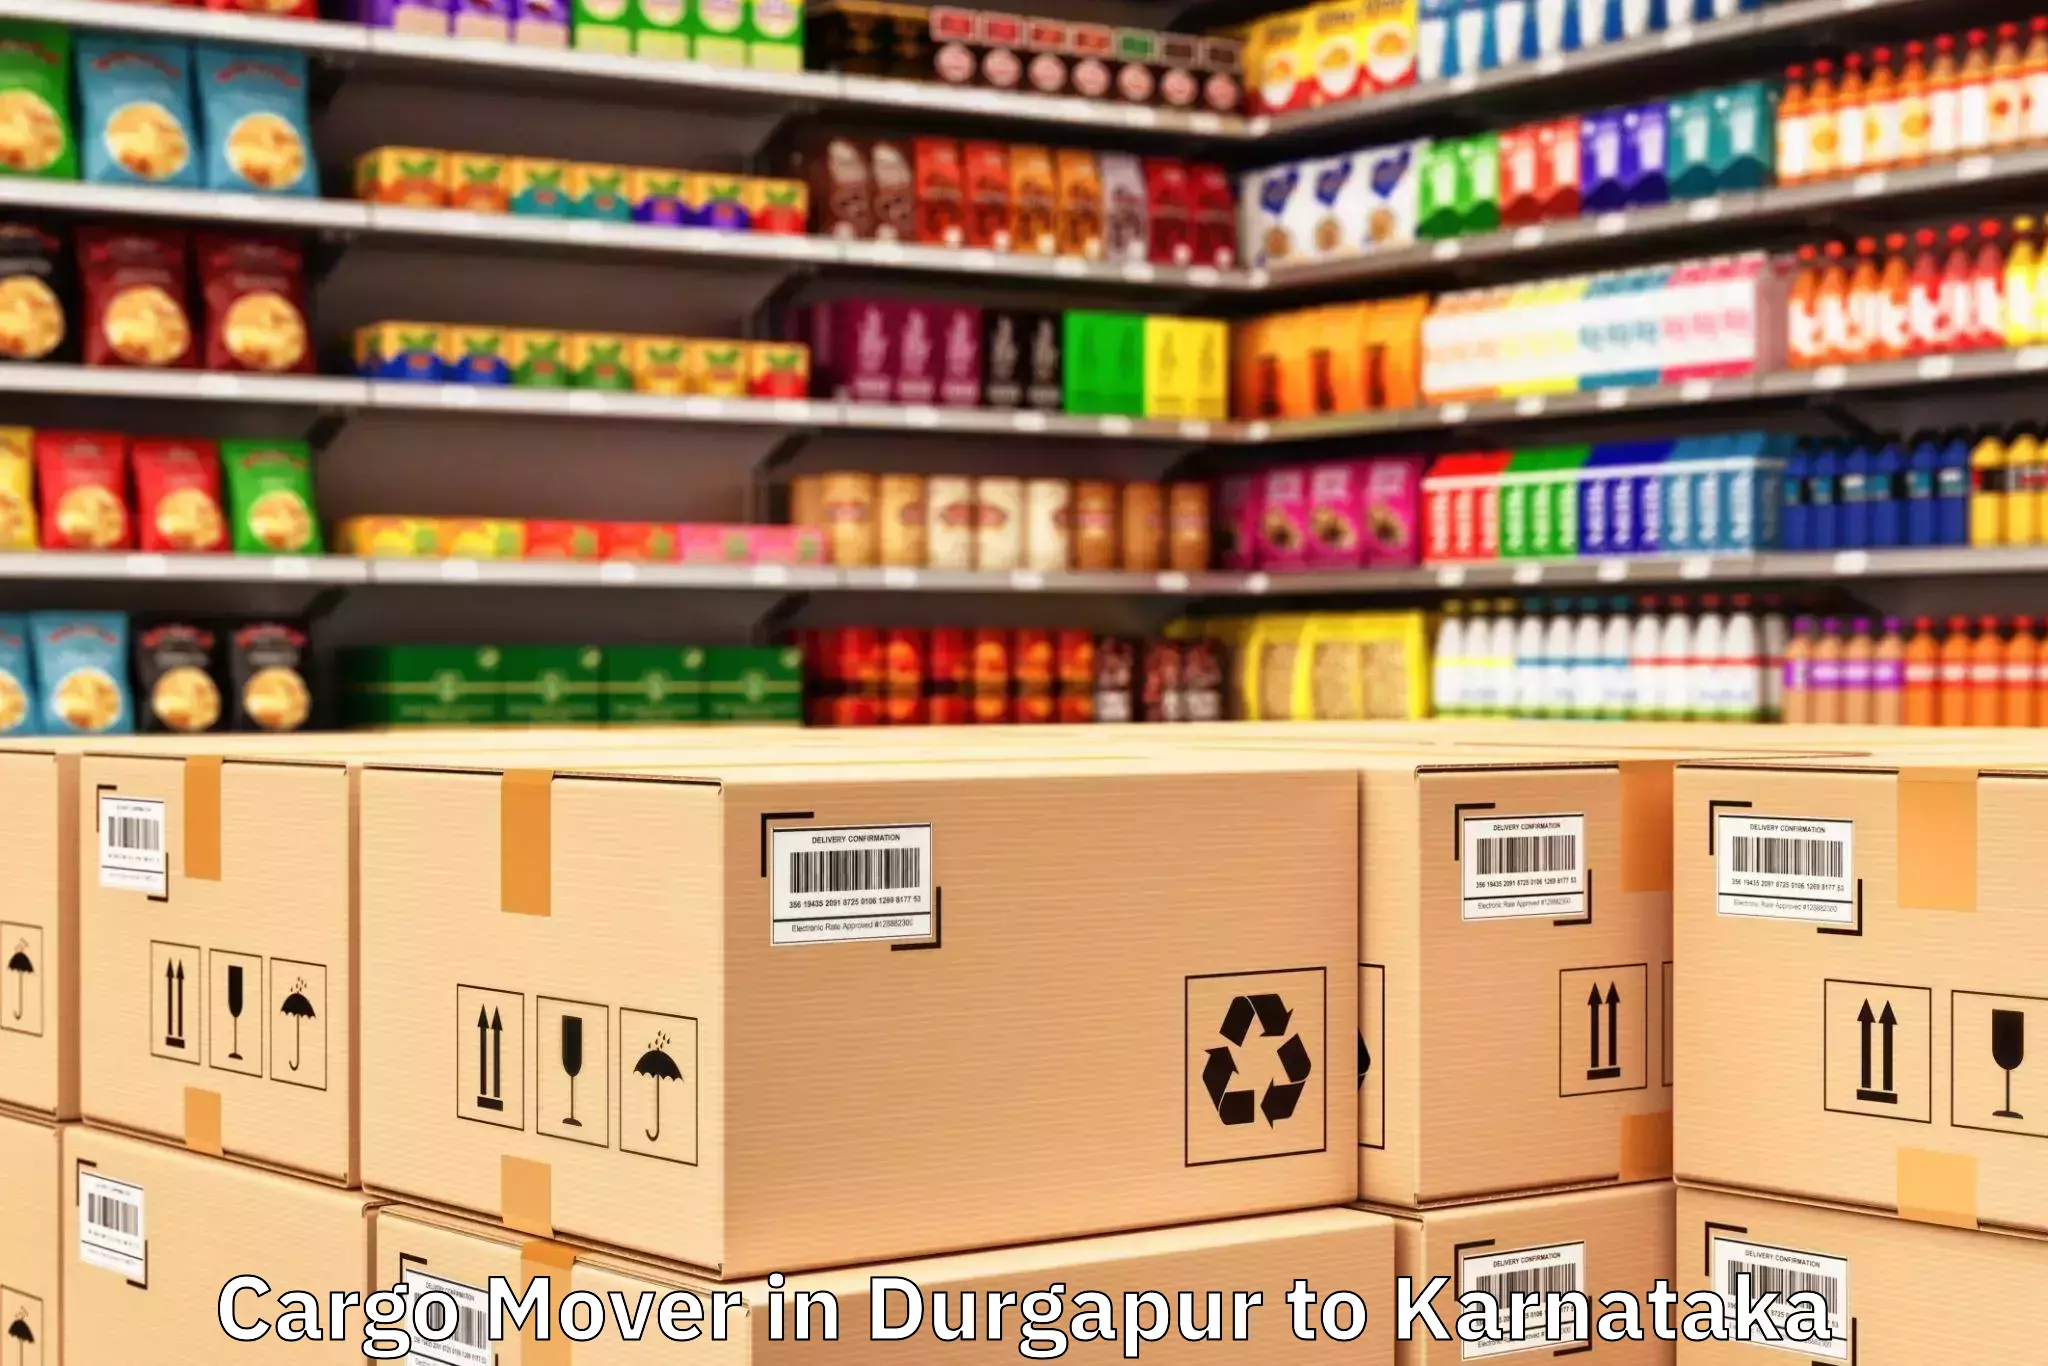 Top Durgapur to Siddapur Cargo Mover Available